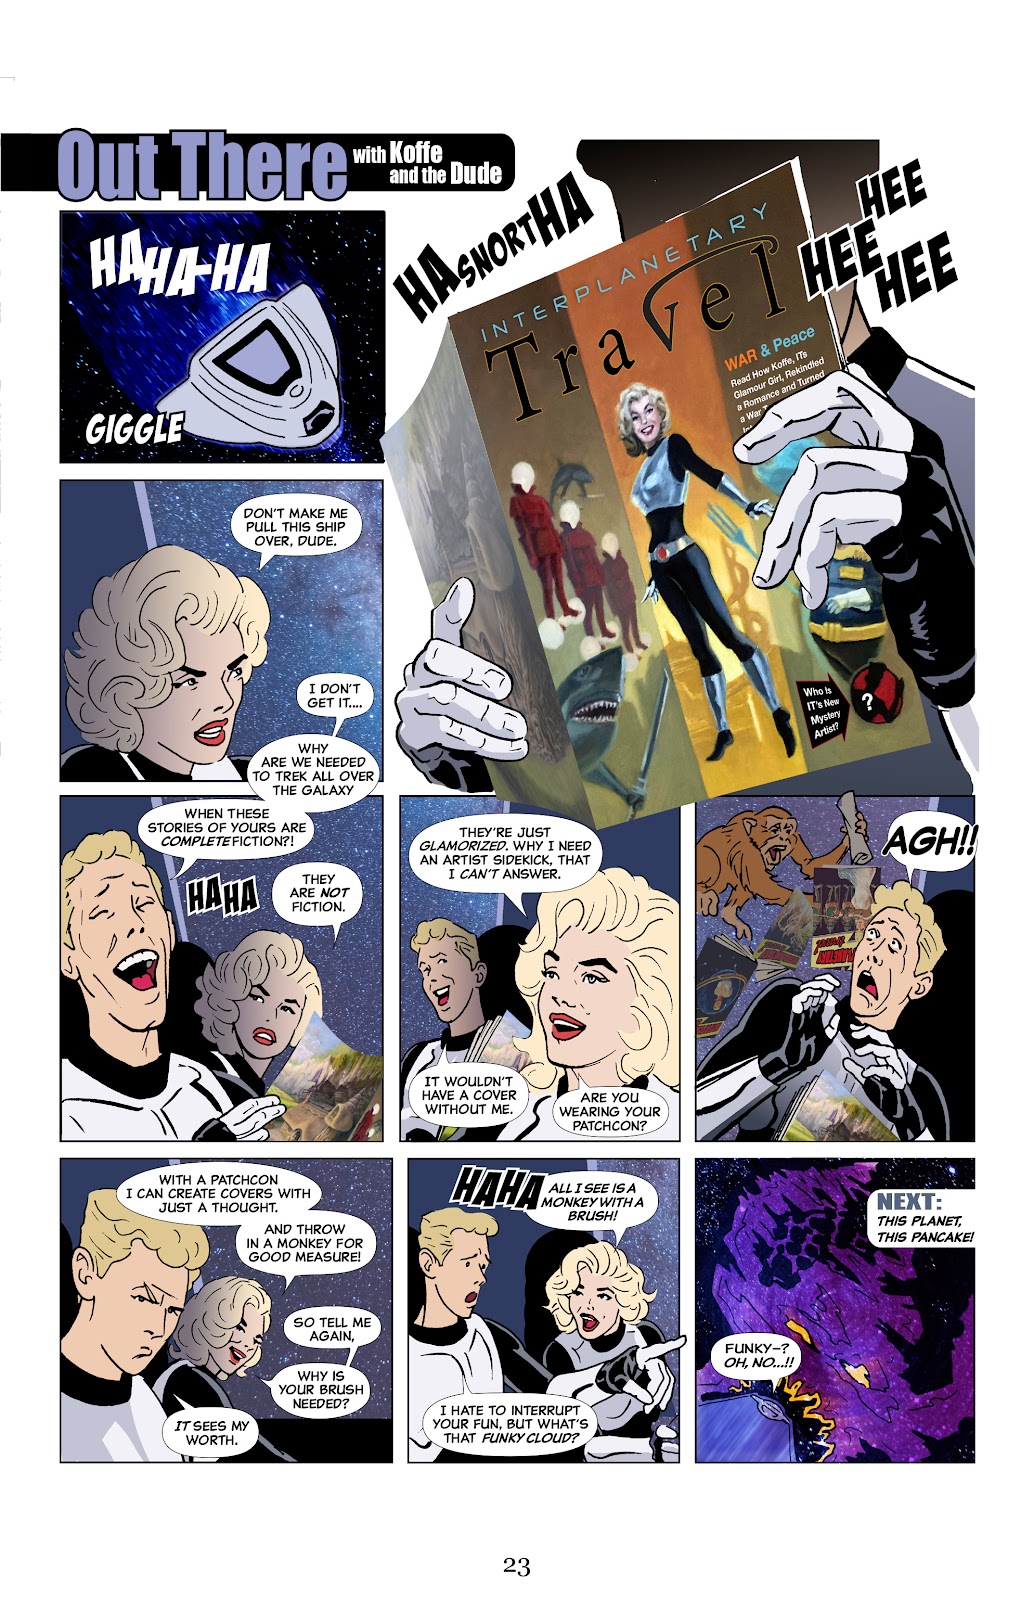 Nexus Newspaper Strips Vol 2: The Battle For Thuneworld issue 1 - Page 25